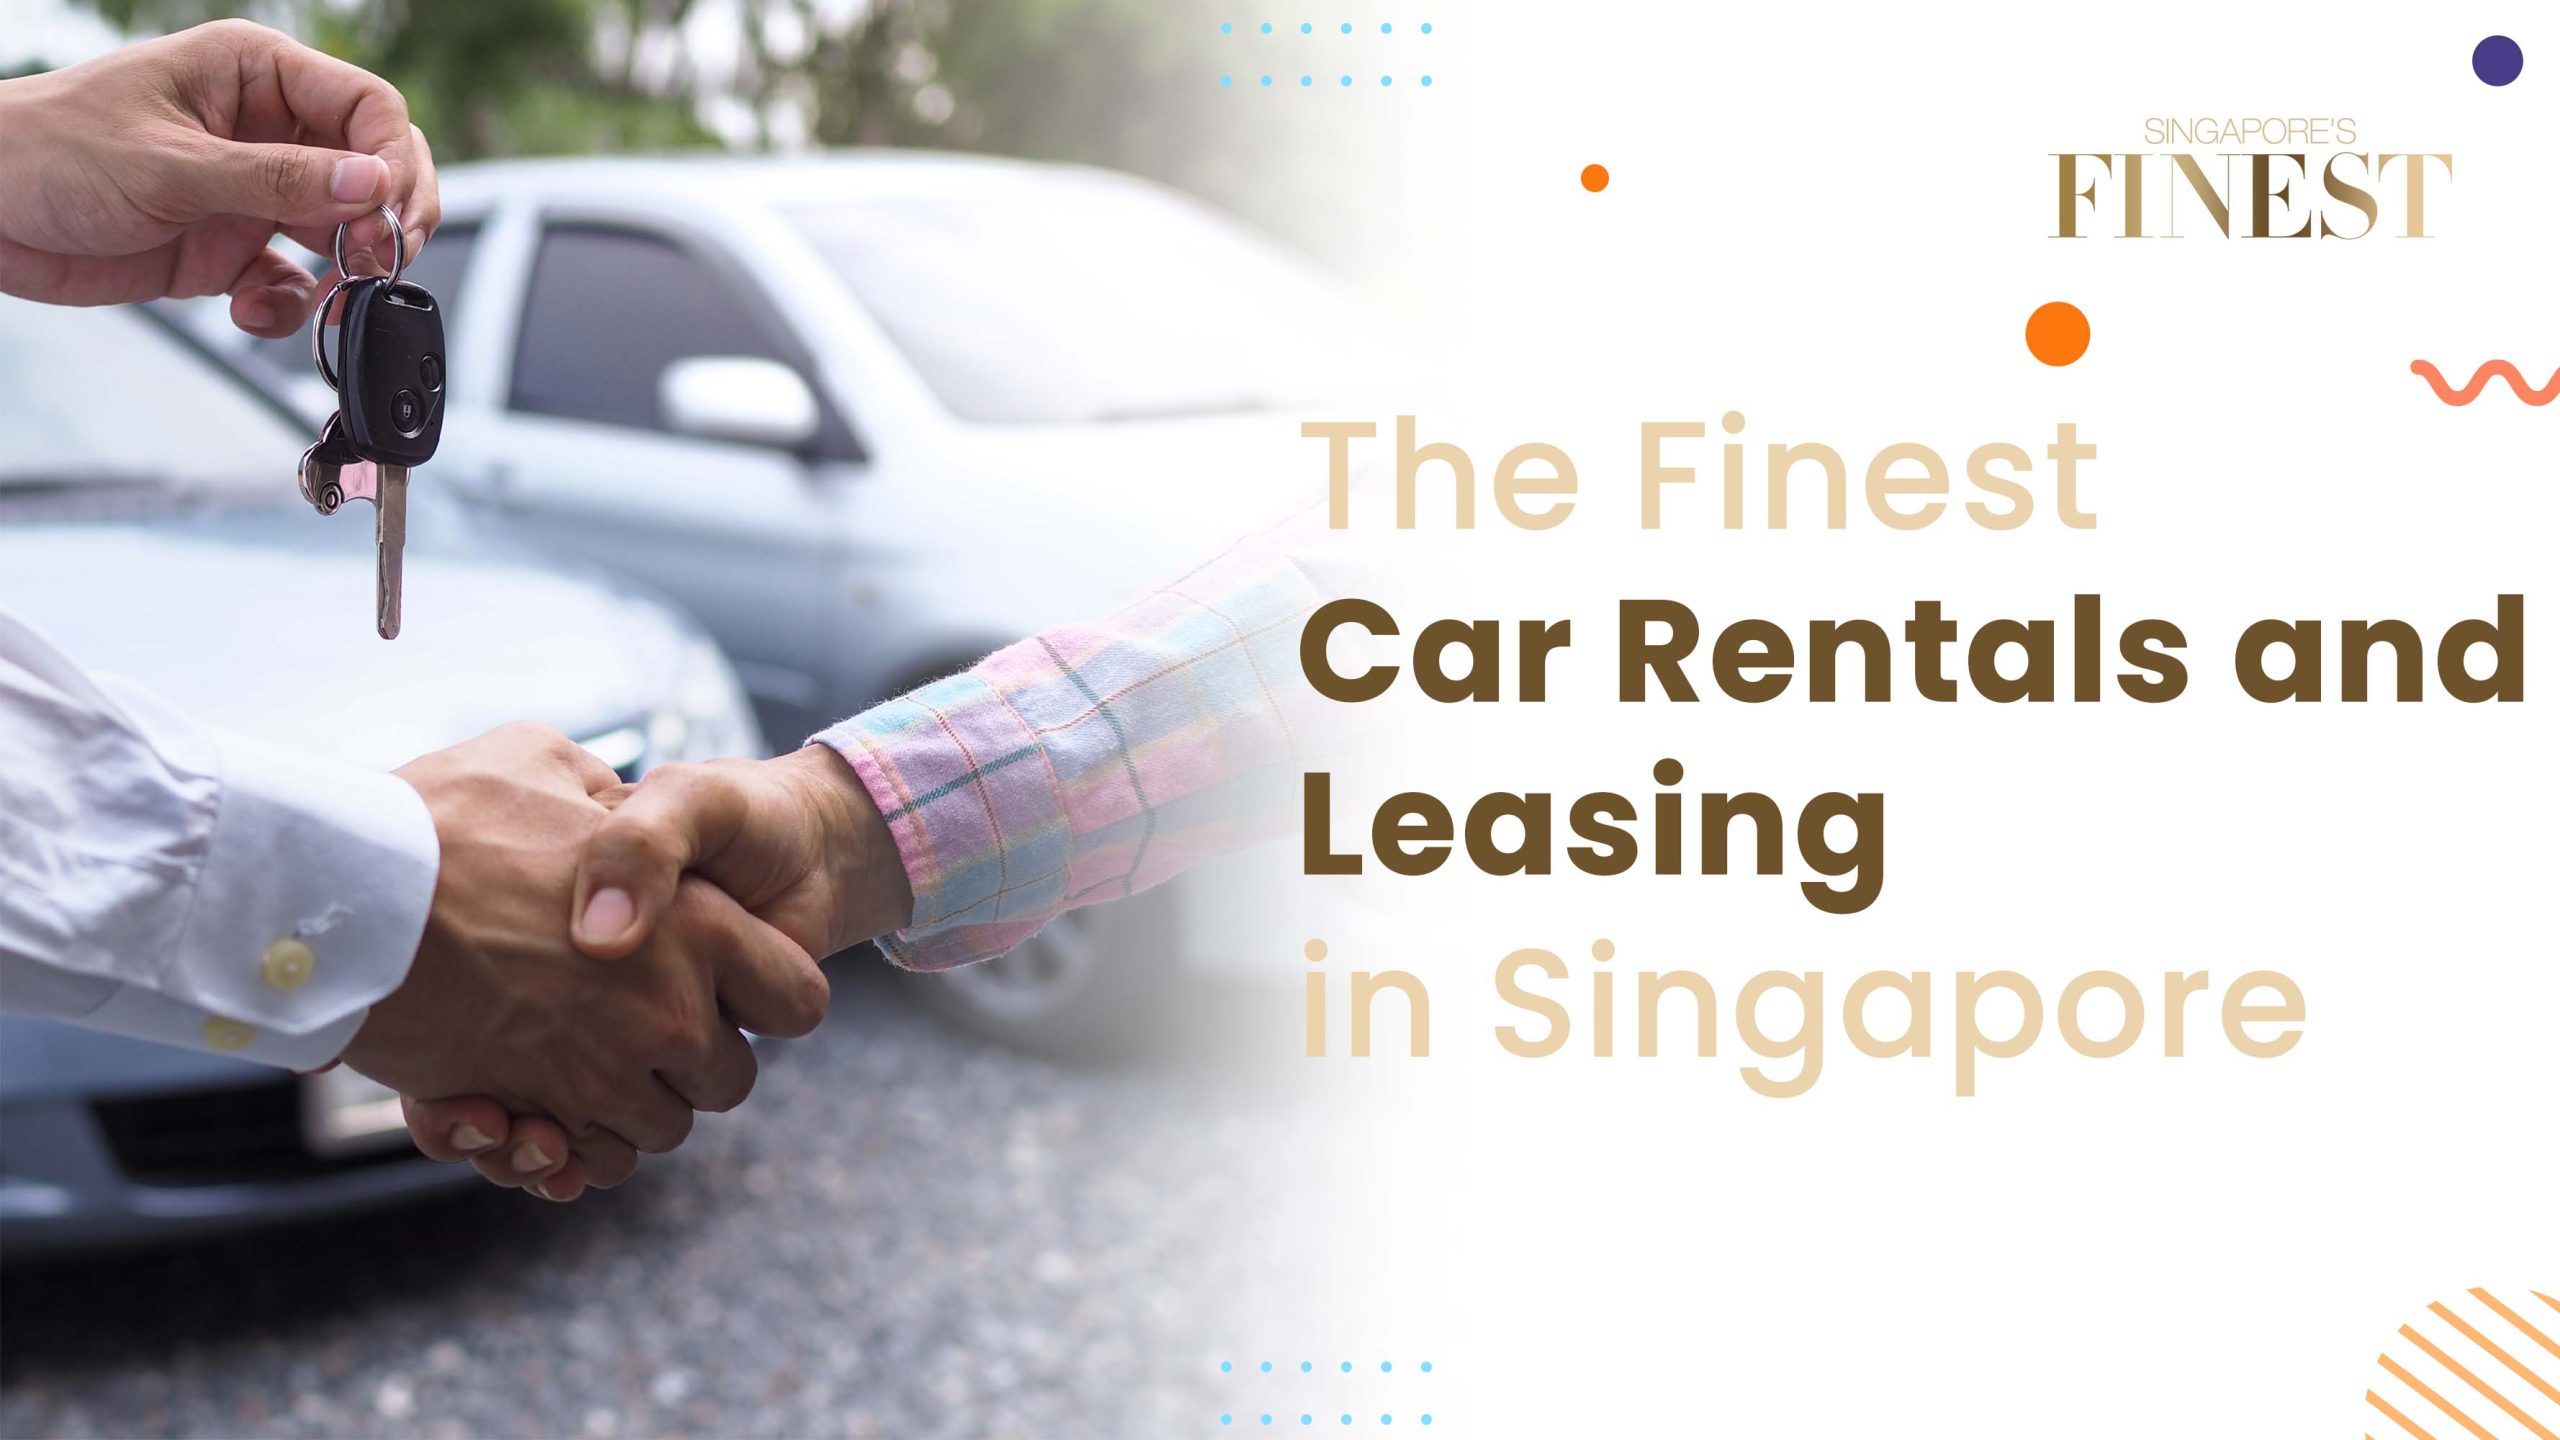 The Finest Car Rentals and Leasing in Singapore